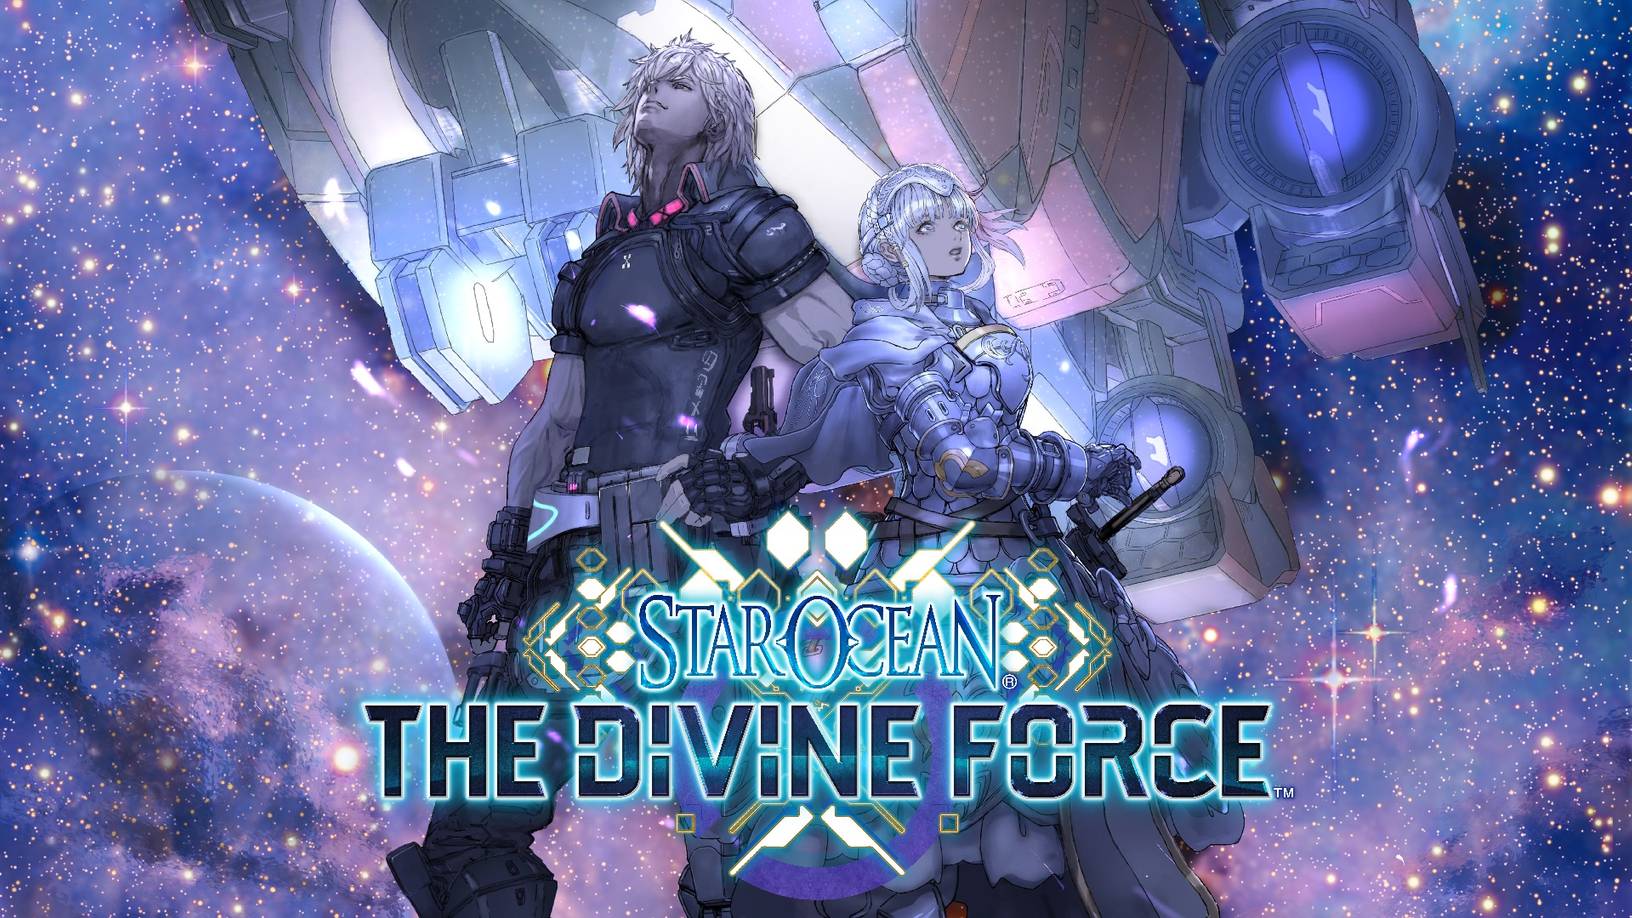 Star Ocean The Divine Force Will Be Freely Upgradeable To PlayStation 5